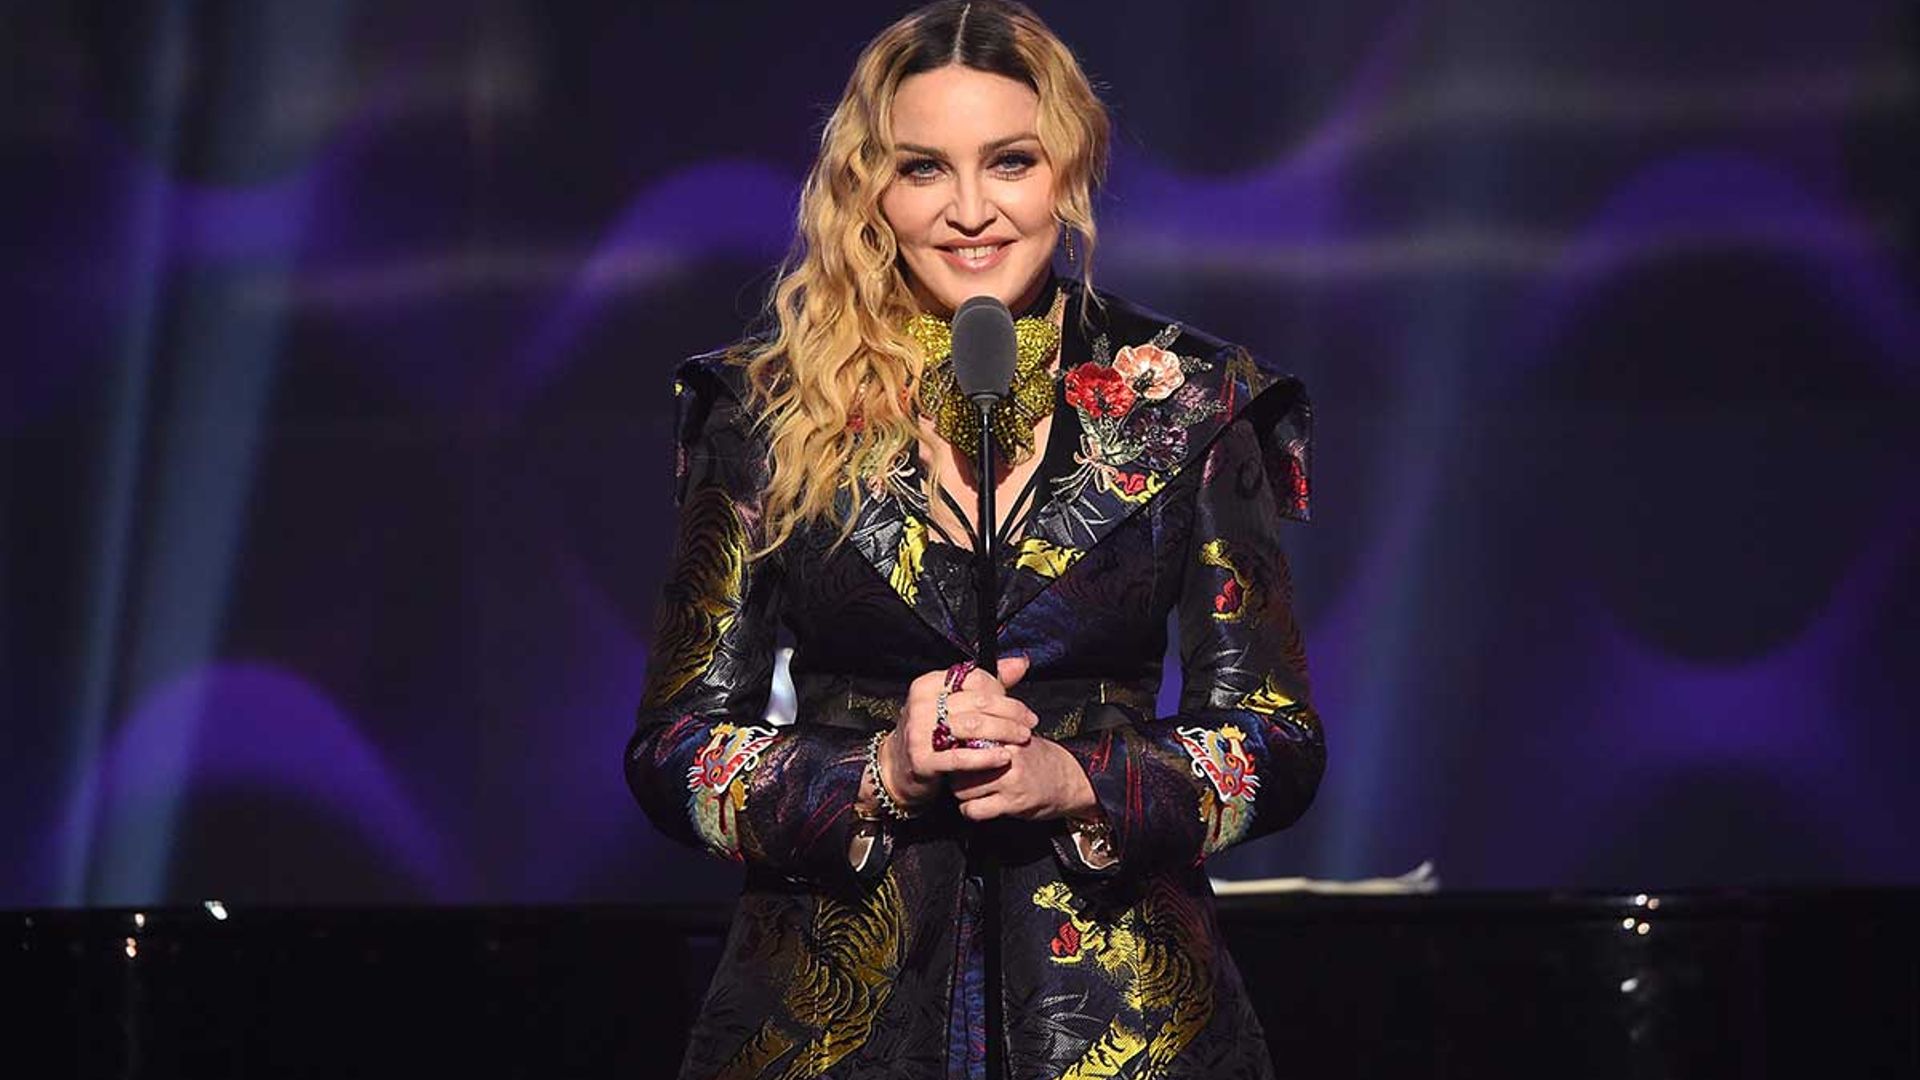 Madonna reveals unexpected news to her fans